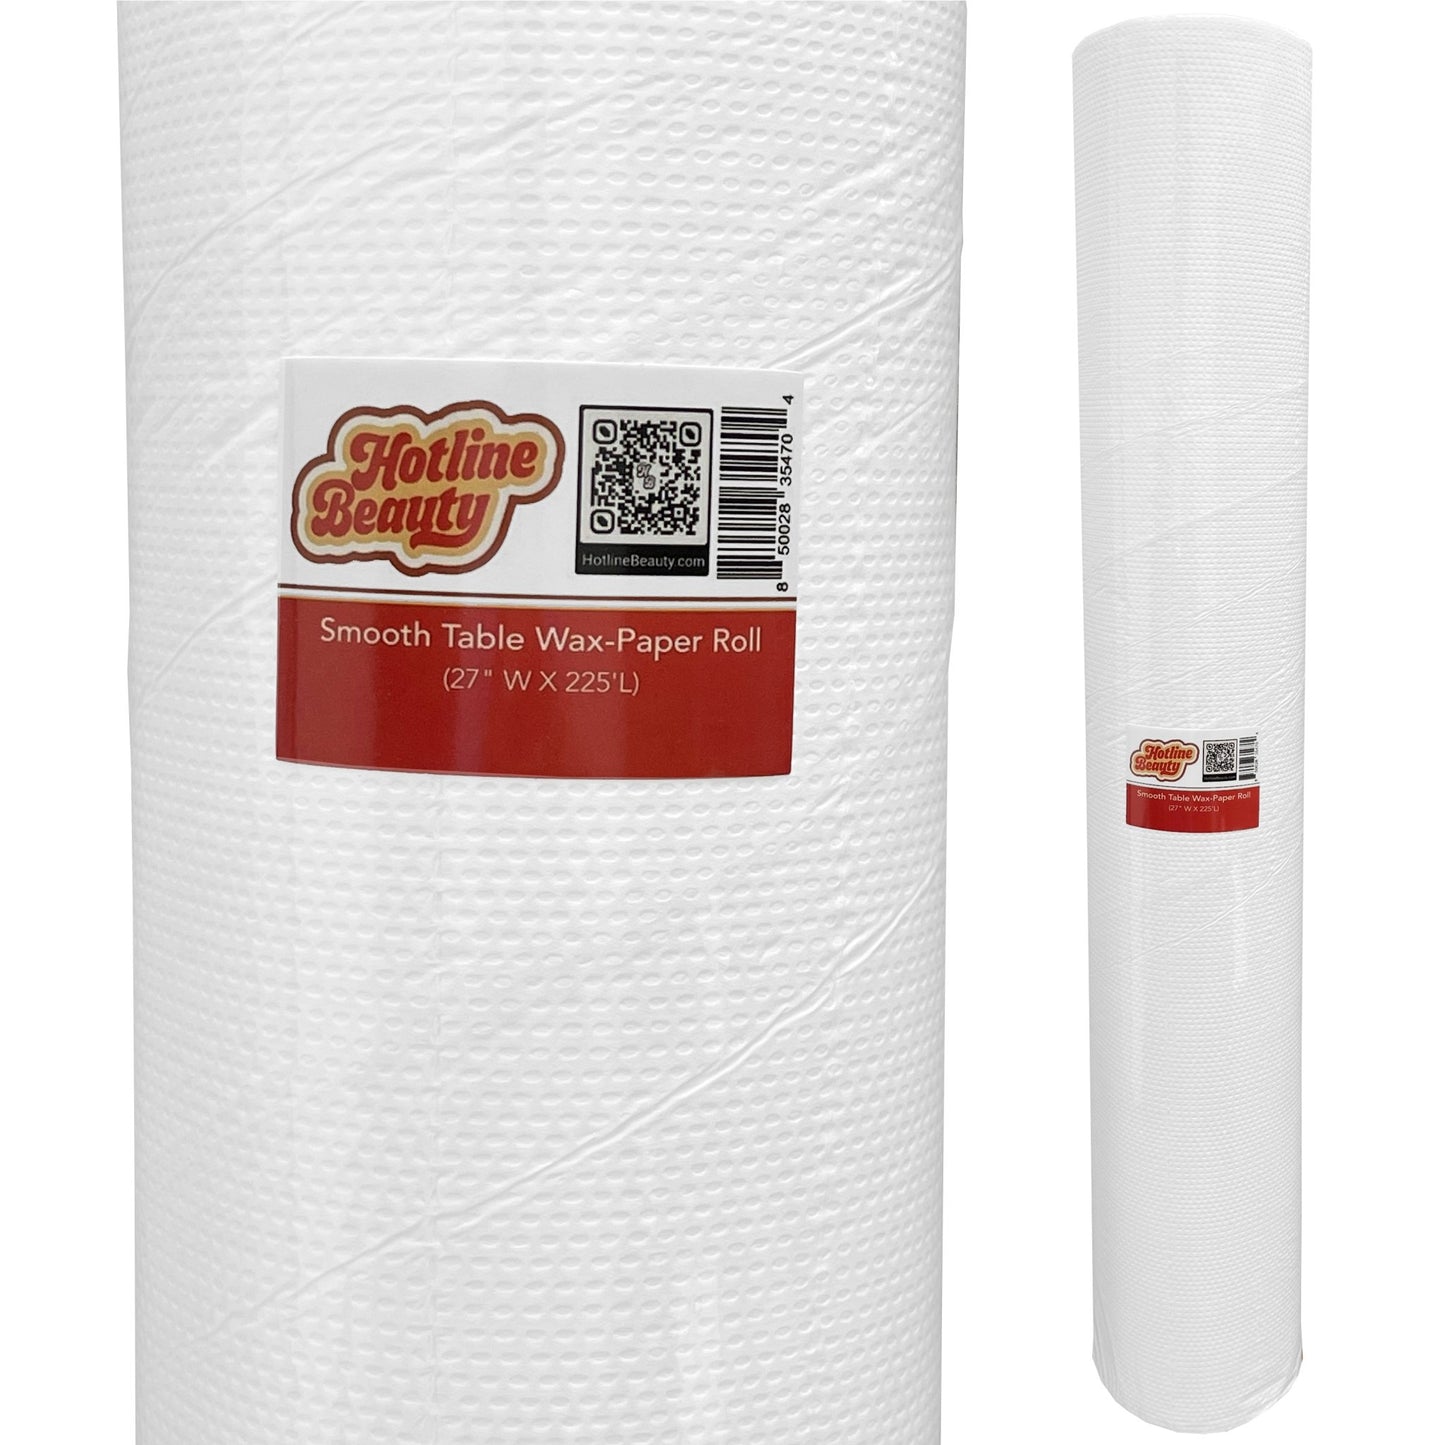 Smooth Table Wax-Paper Roll | 27 W x 225'L | Hotline Beauty